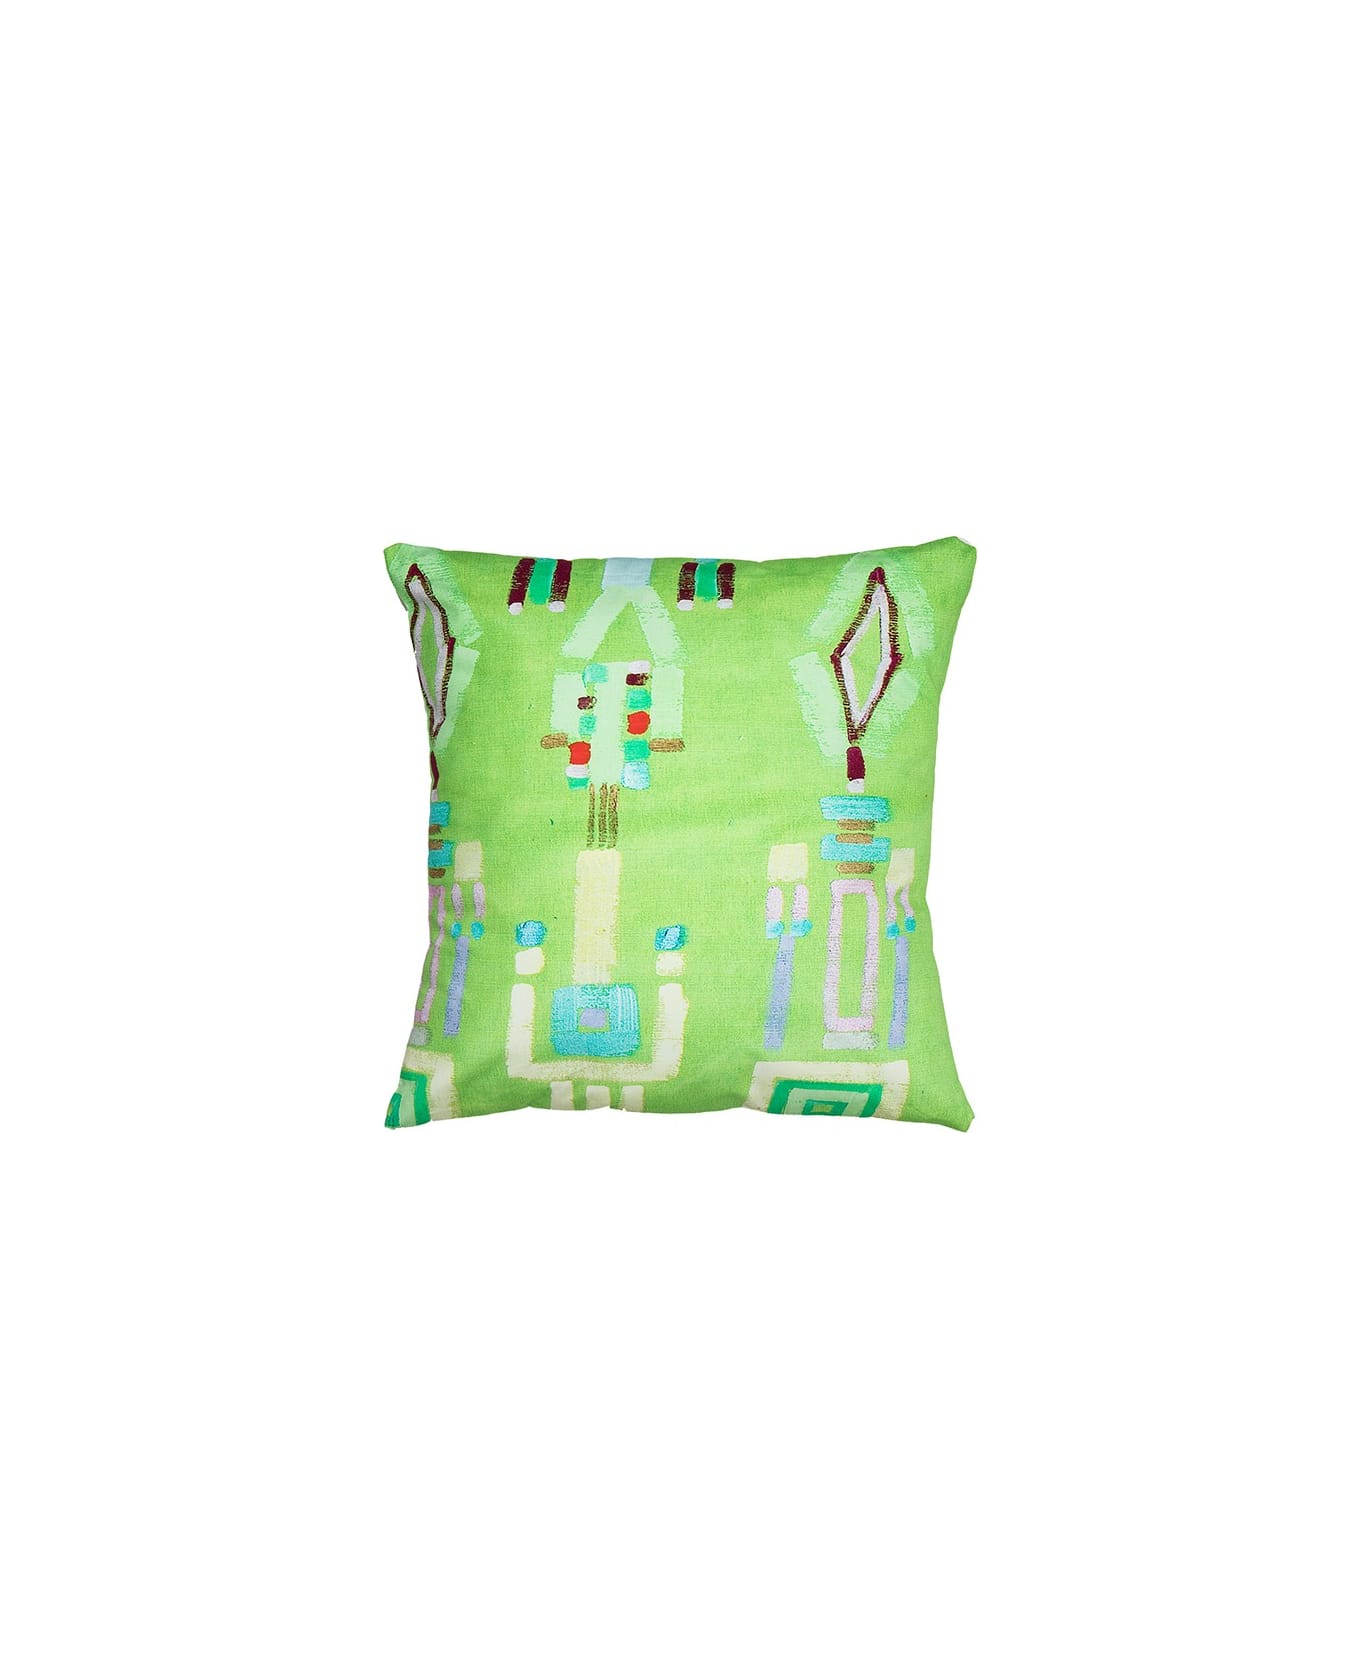 Le Botteghe su Gologone Printed Cushions 50x50 Cm - Lime Green クッション